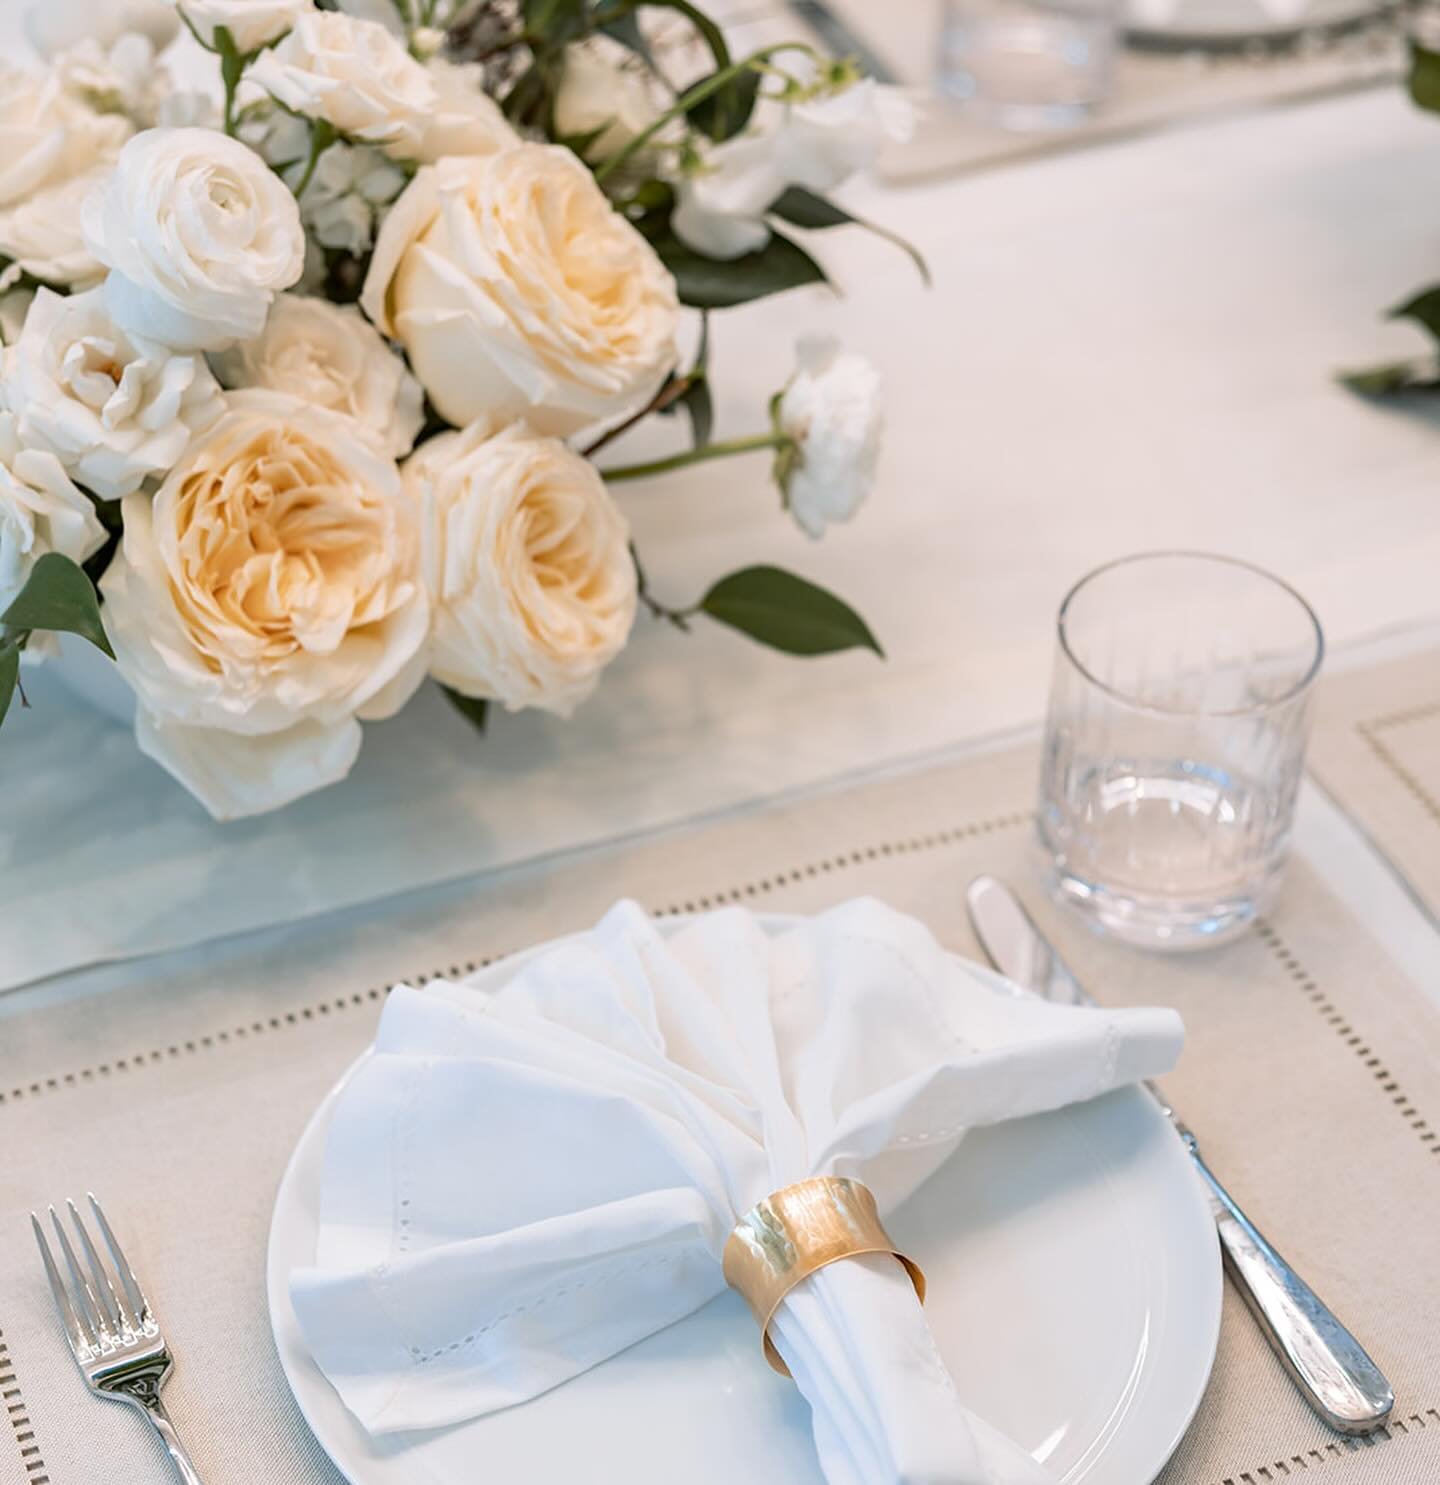 White Rose: Blooming in simplicity, yet profound in serenity. 

@magnoliapinestudios